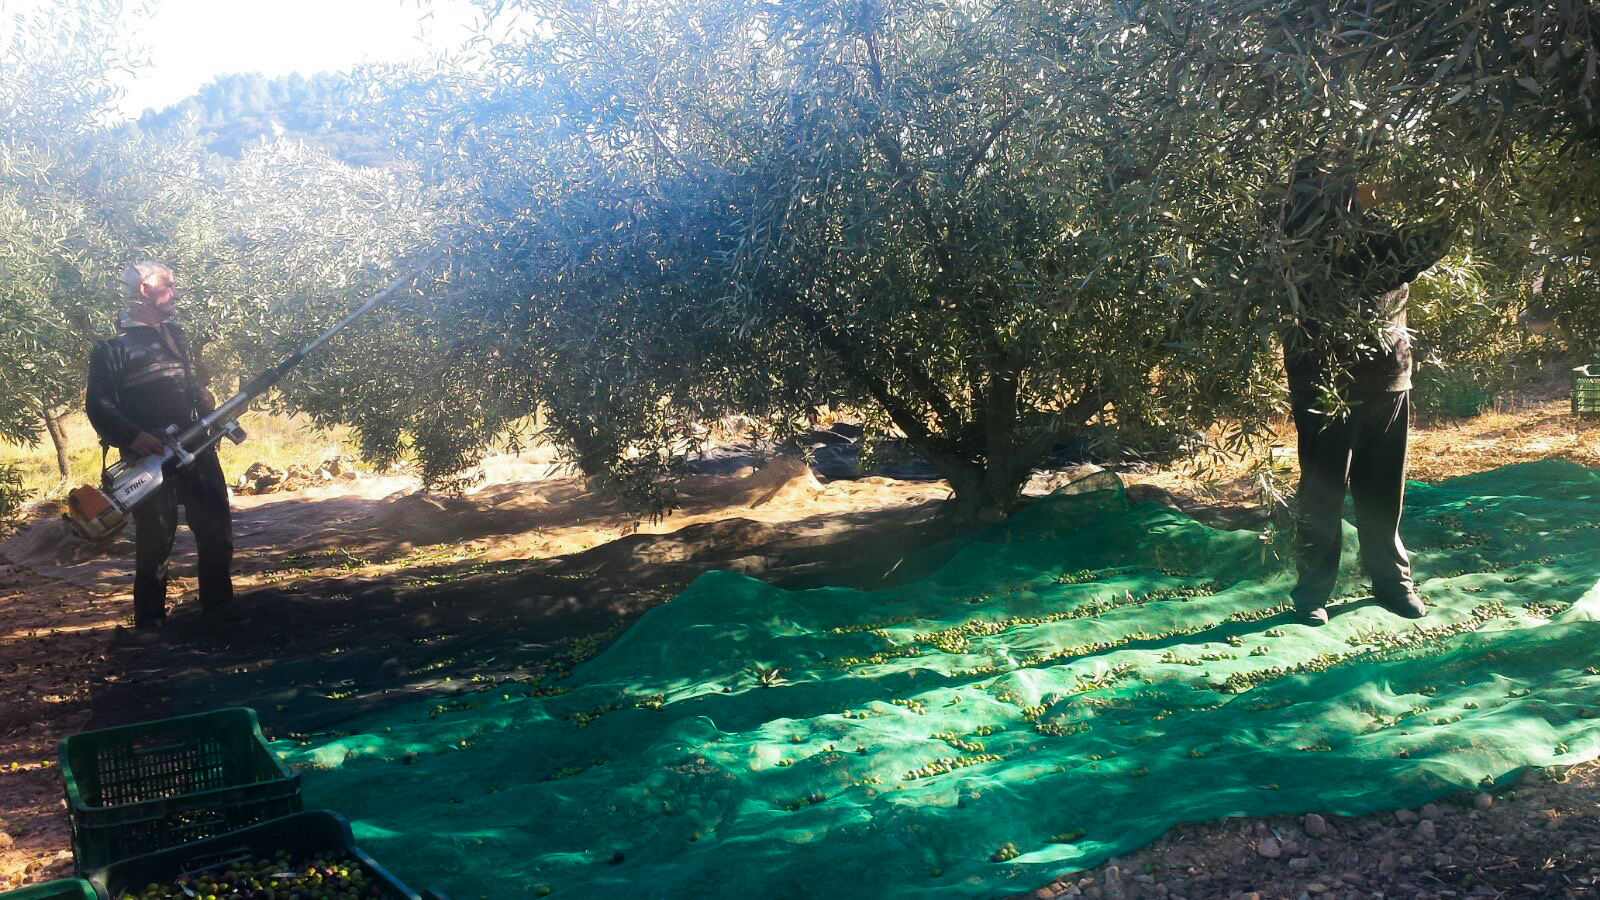 The olive picking in december